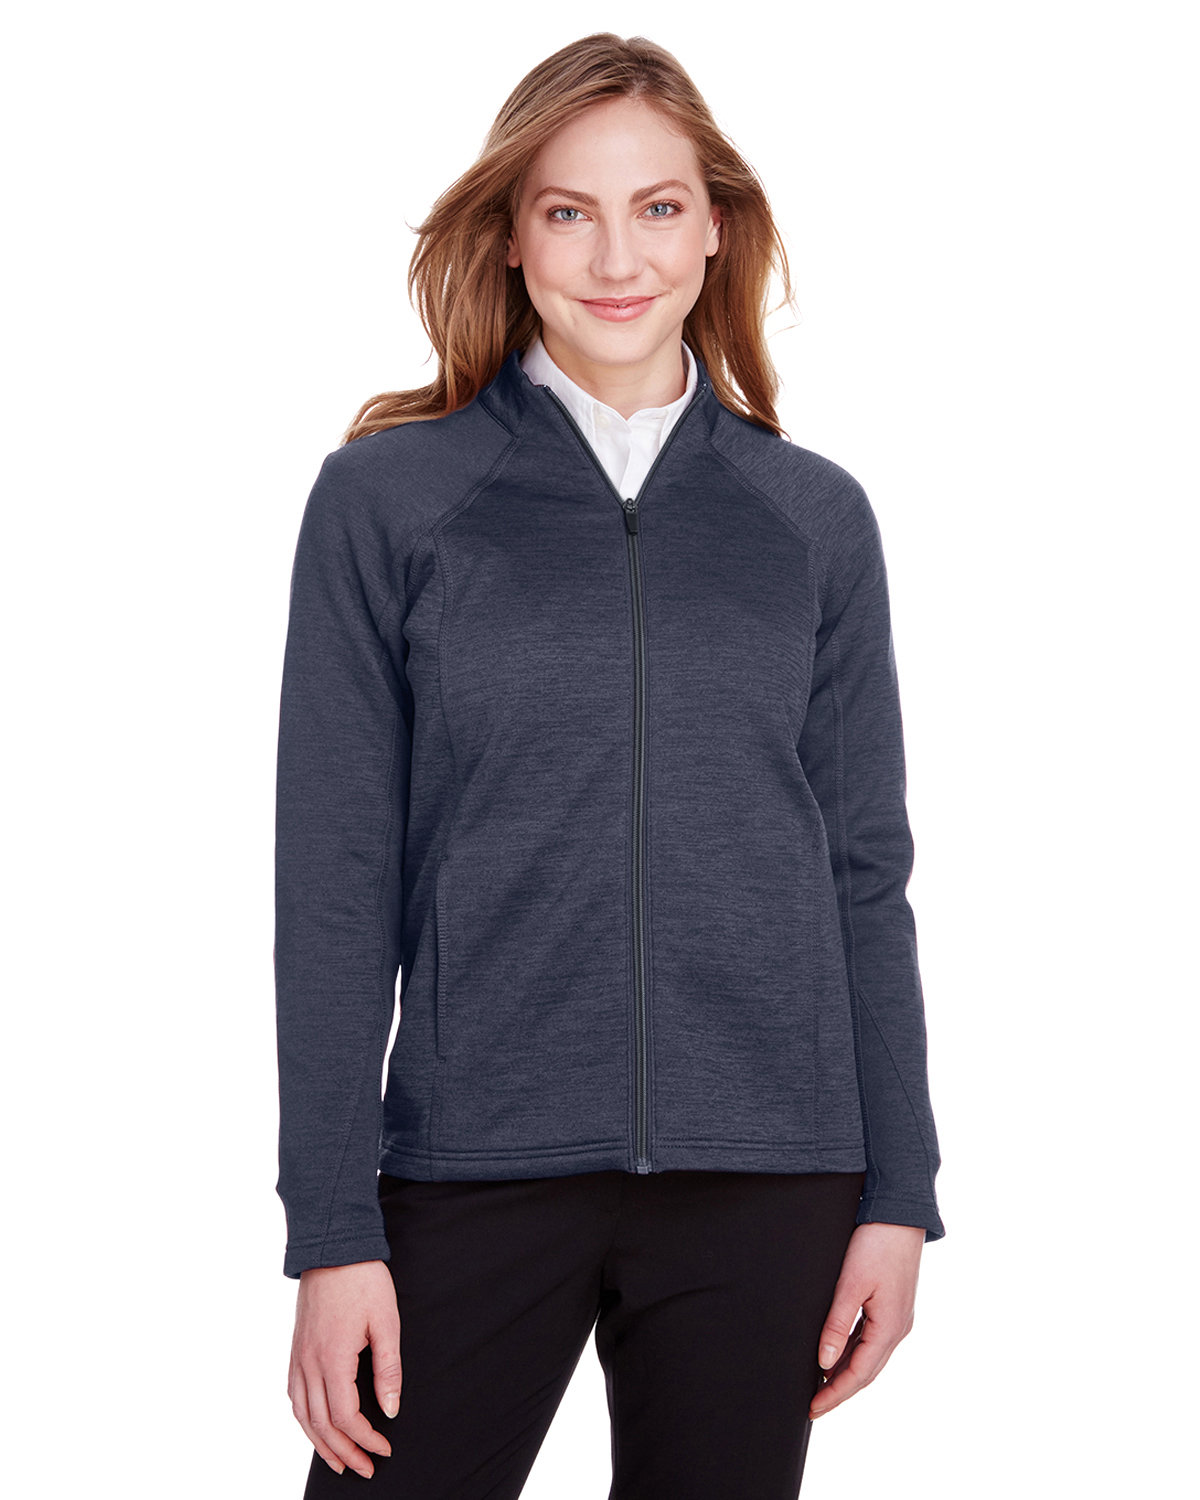 North End Ladies Flux 2.0 Full-Zip Jacket CLSC NVY HT/ CRB 